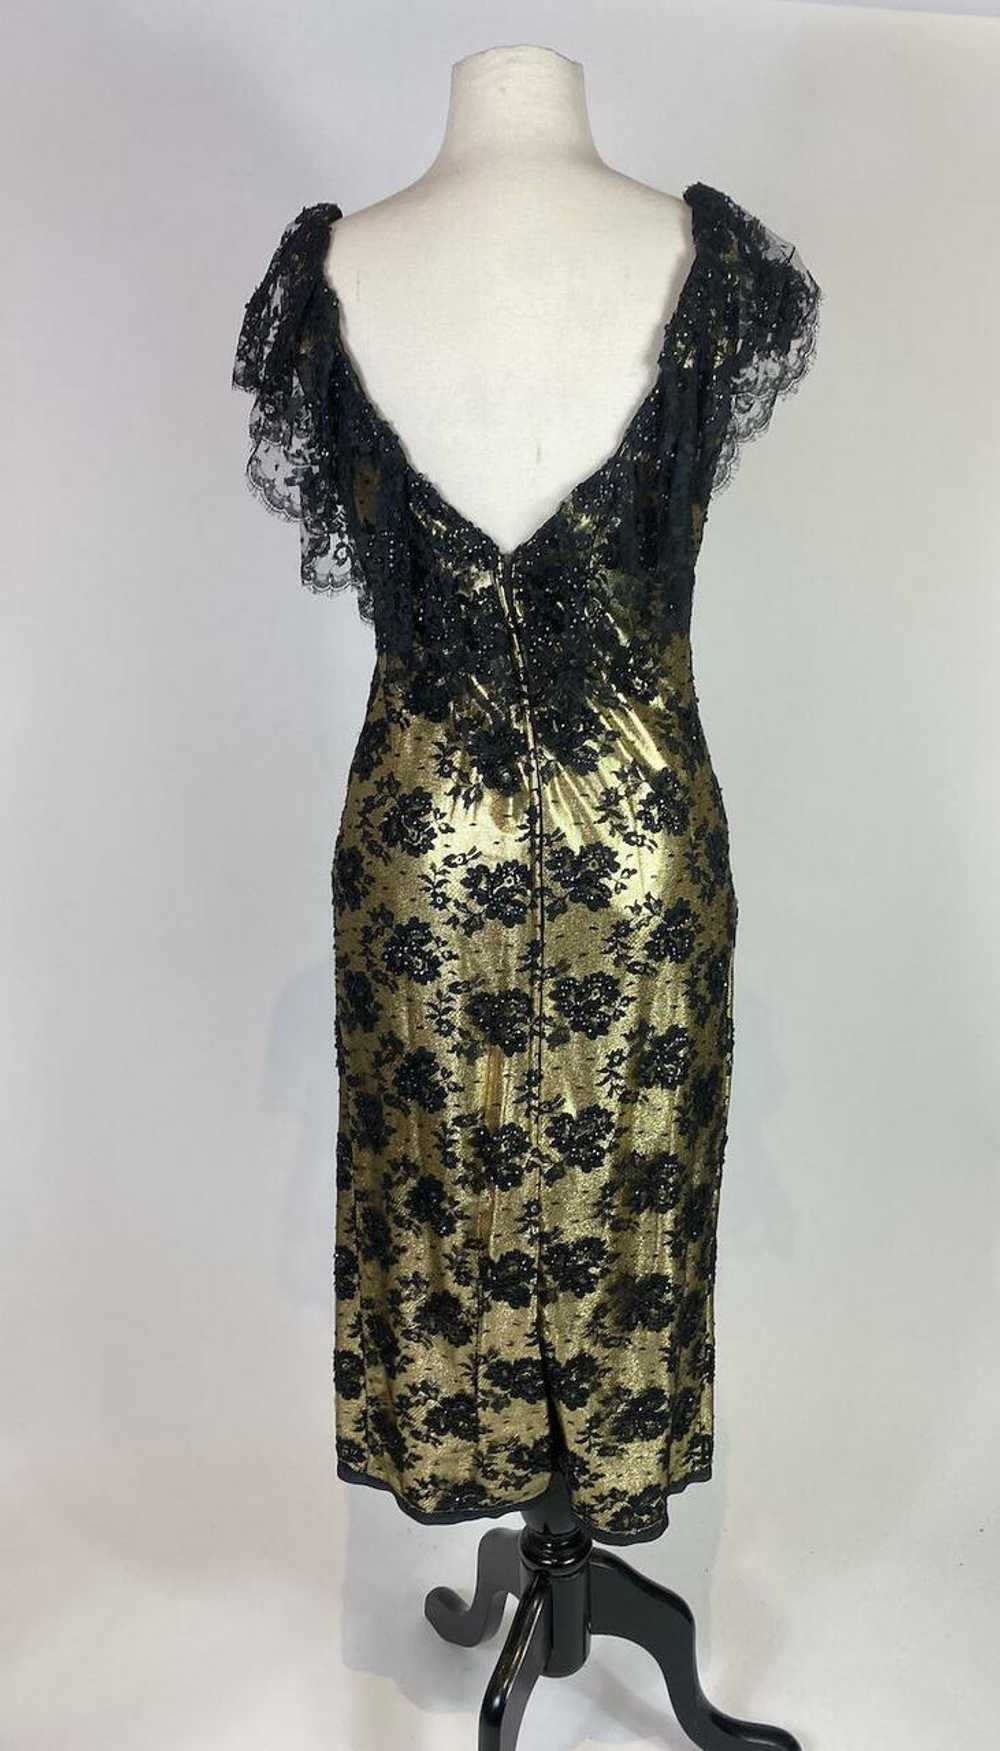 1950s - 1960s Gold Lace Overlay Sequin Dress - image 5